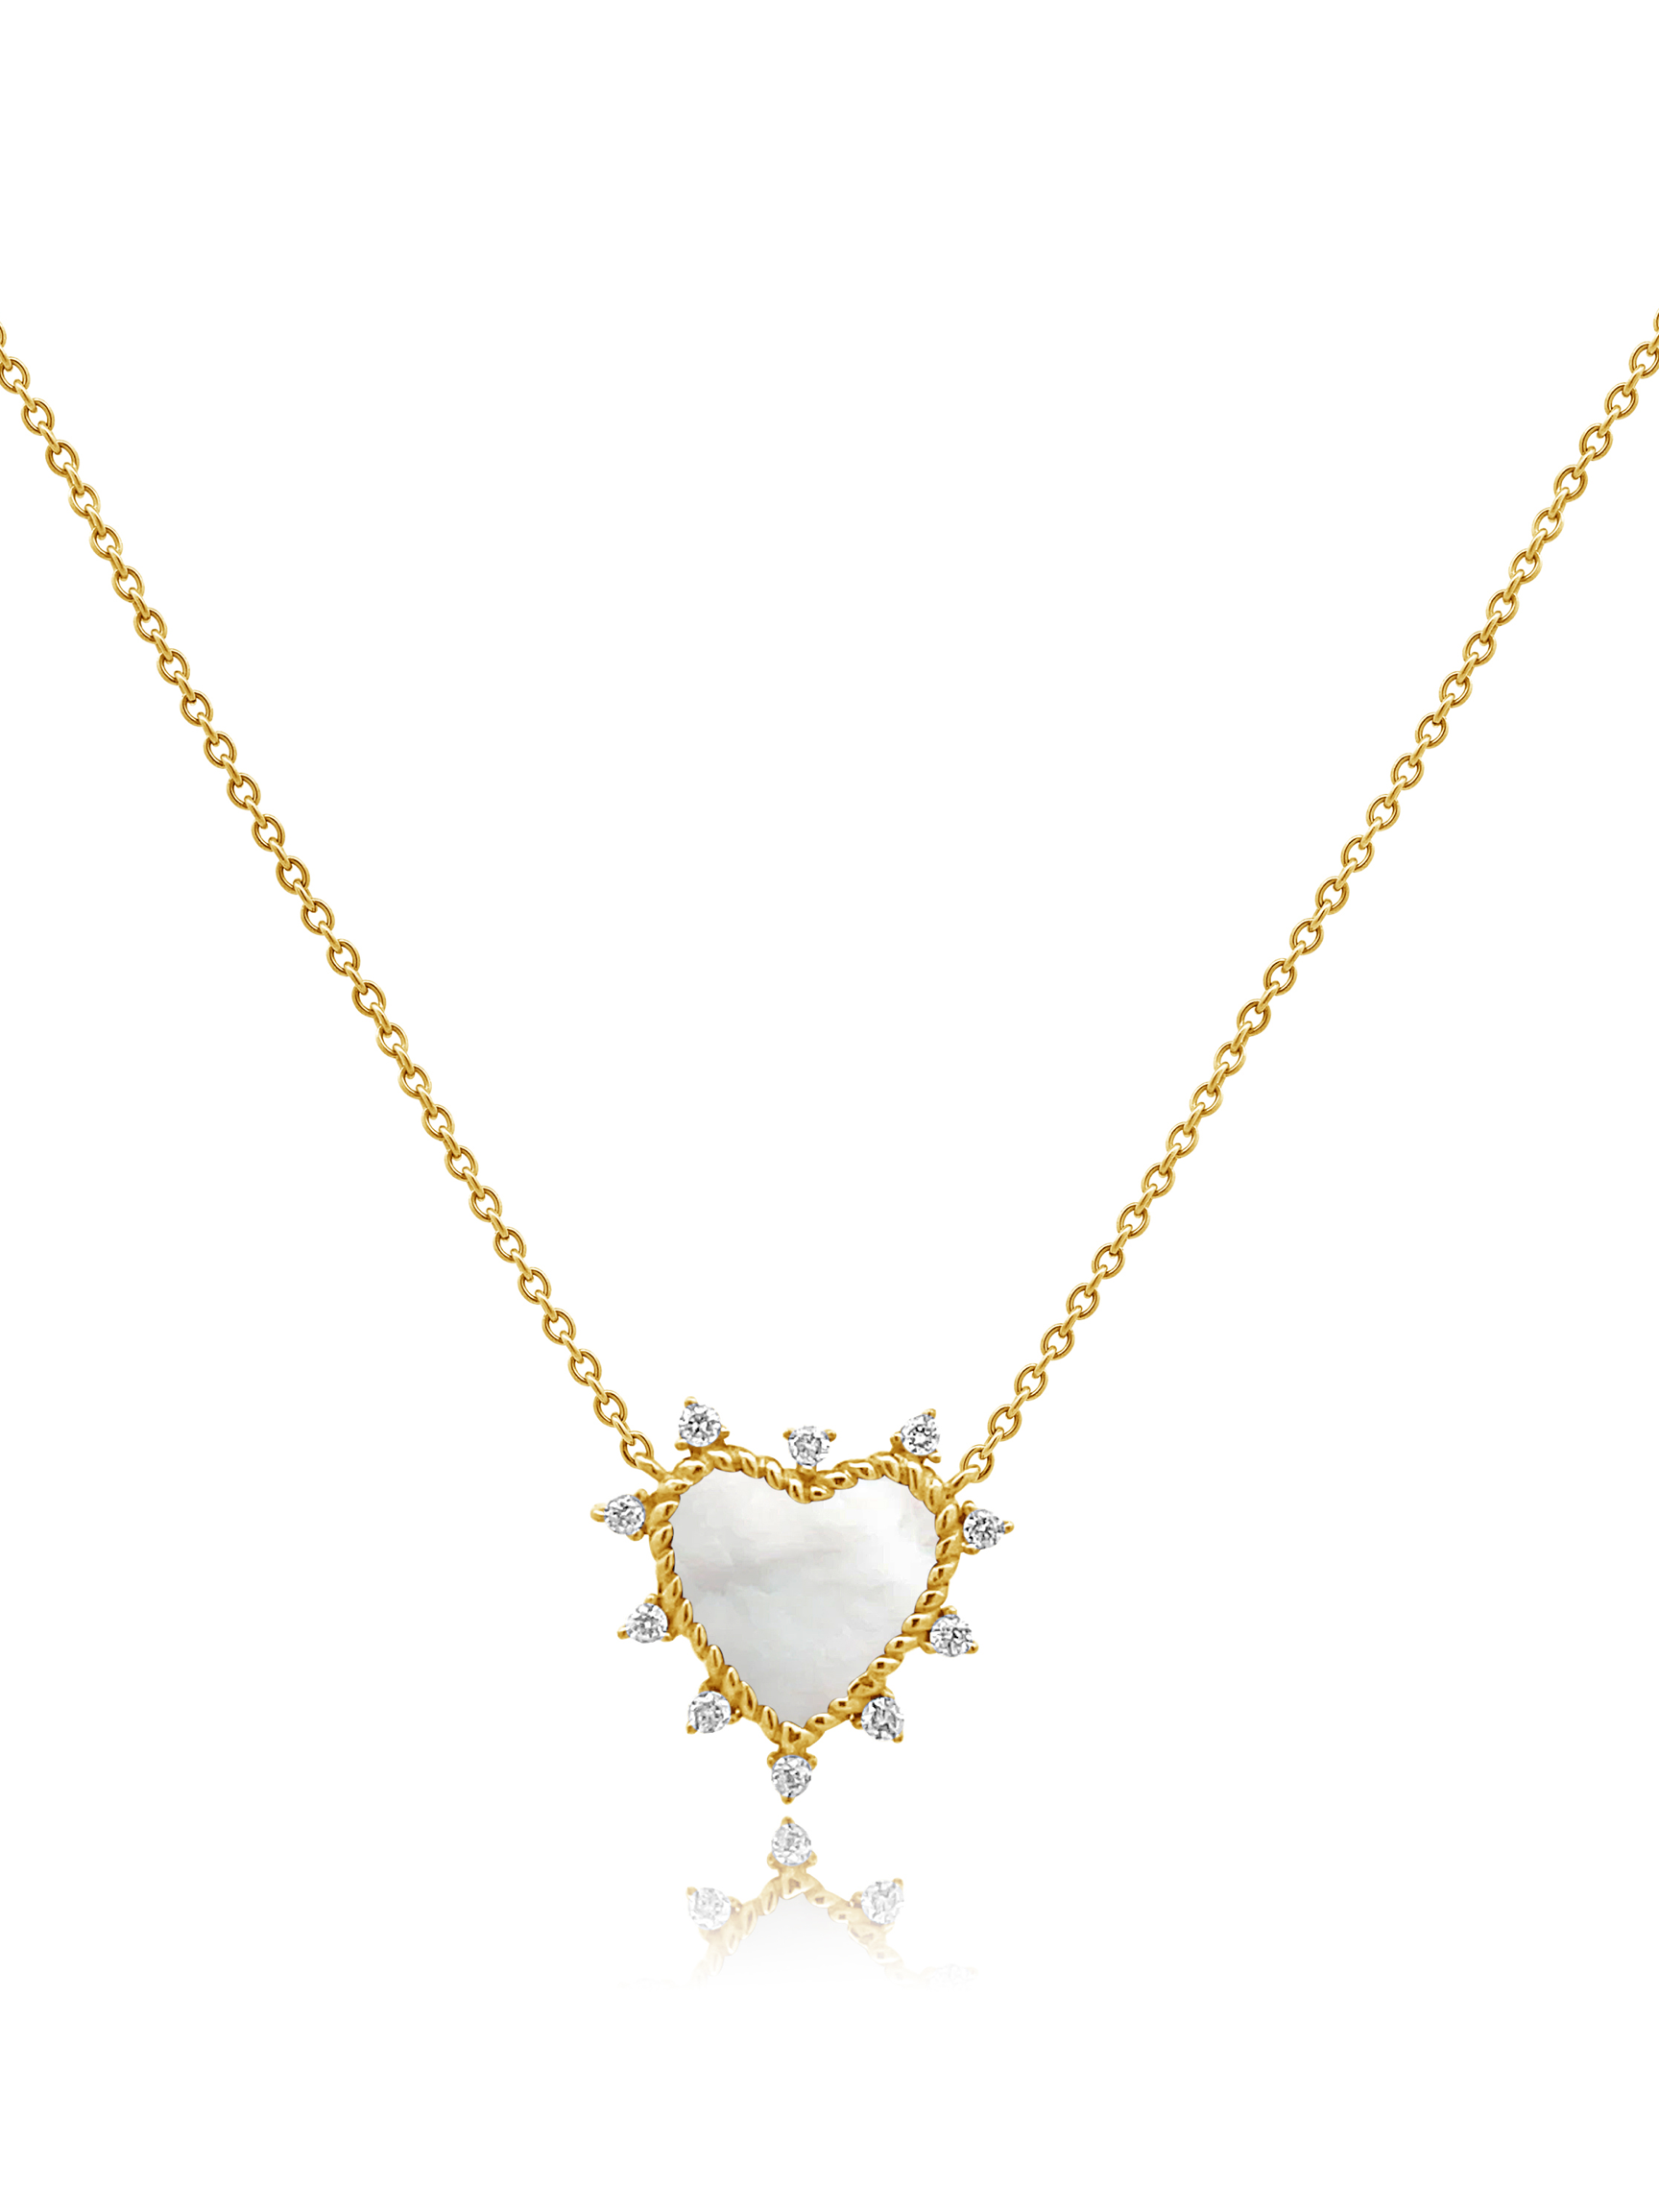 Diamond + Mother of Pearl Heart Necklace